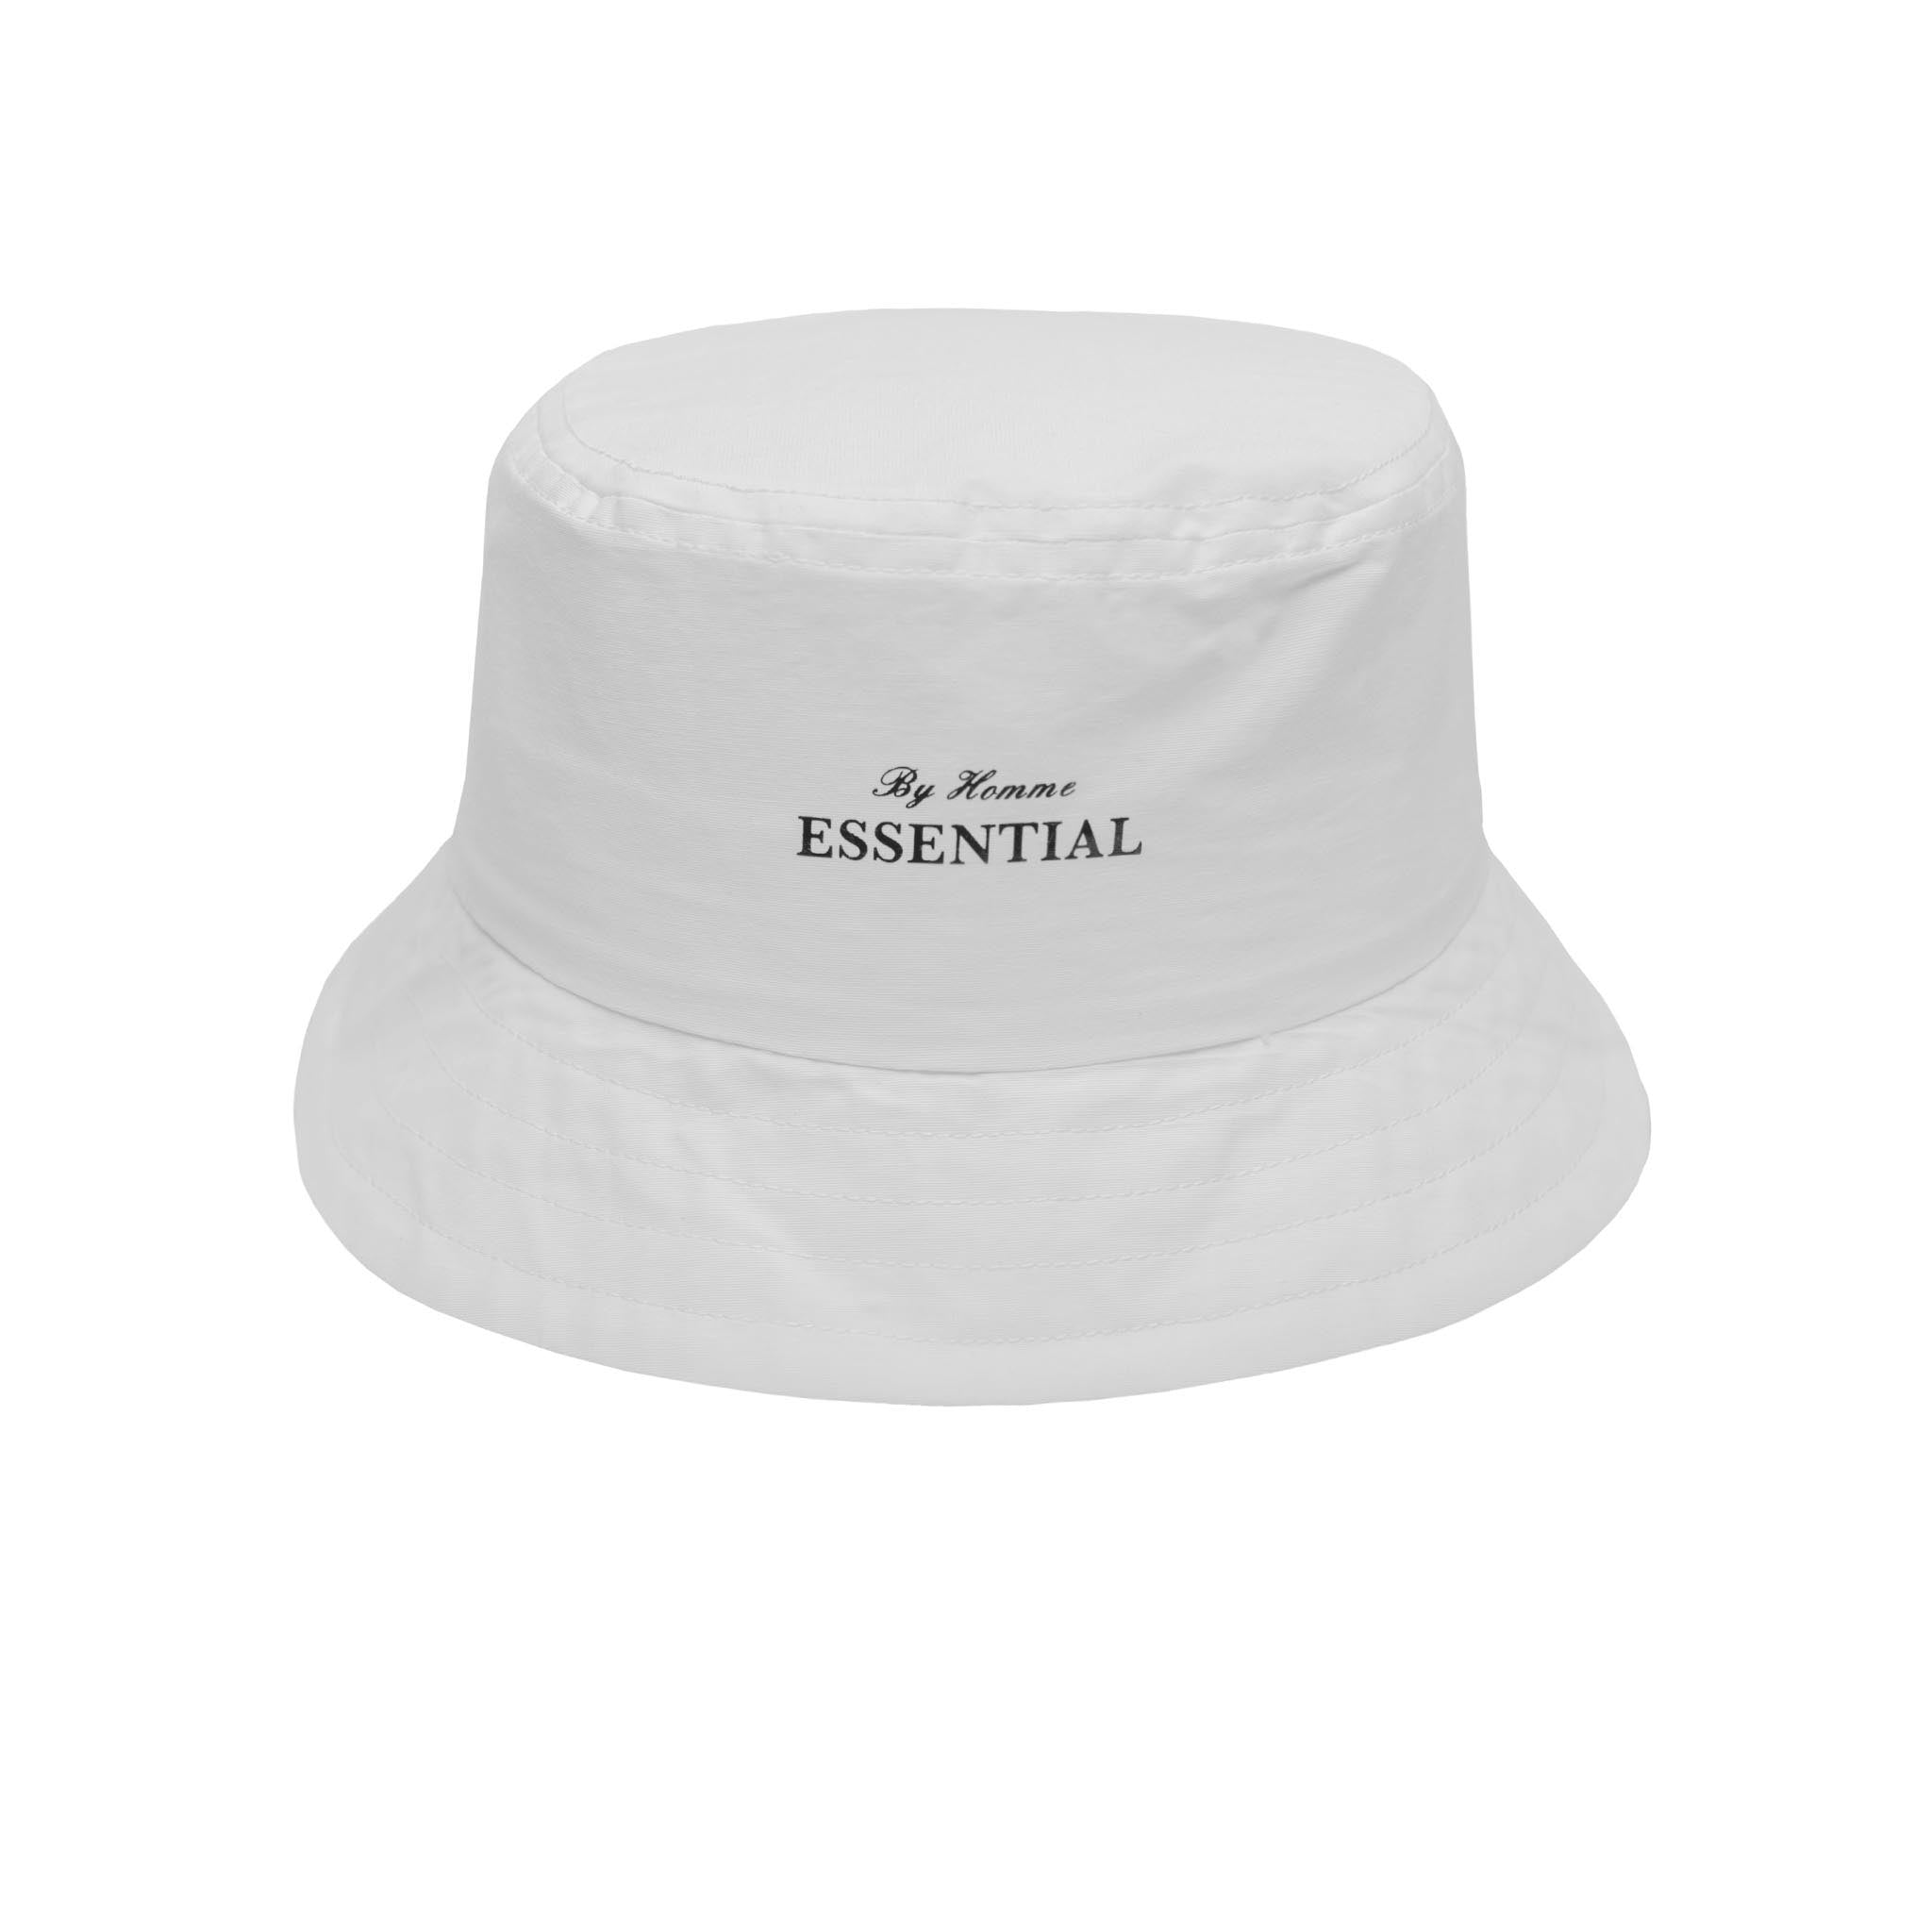 HOMME+ ESSENTIAL by Homme Bucket Hat White